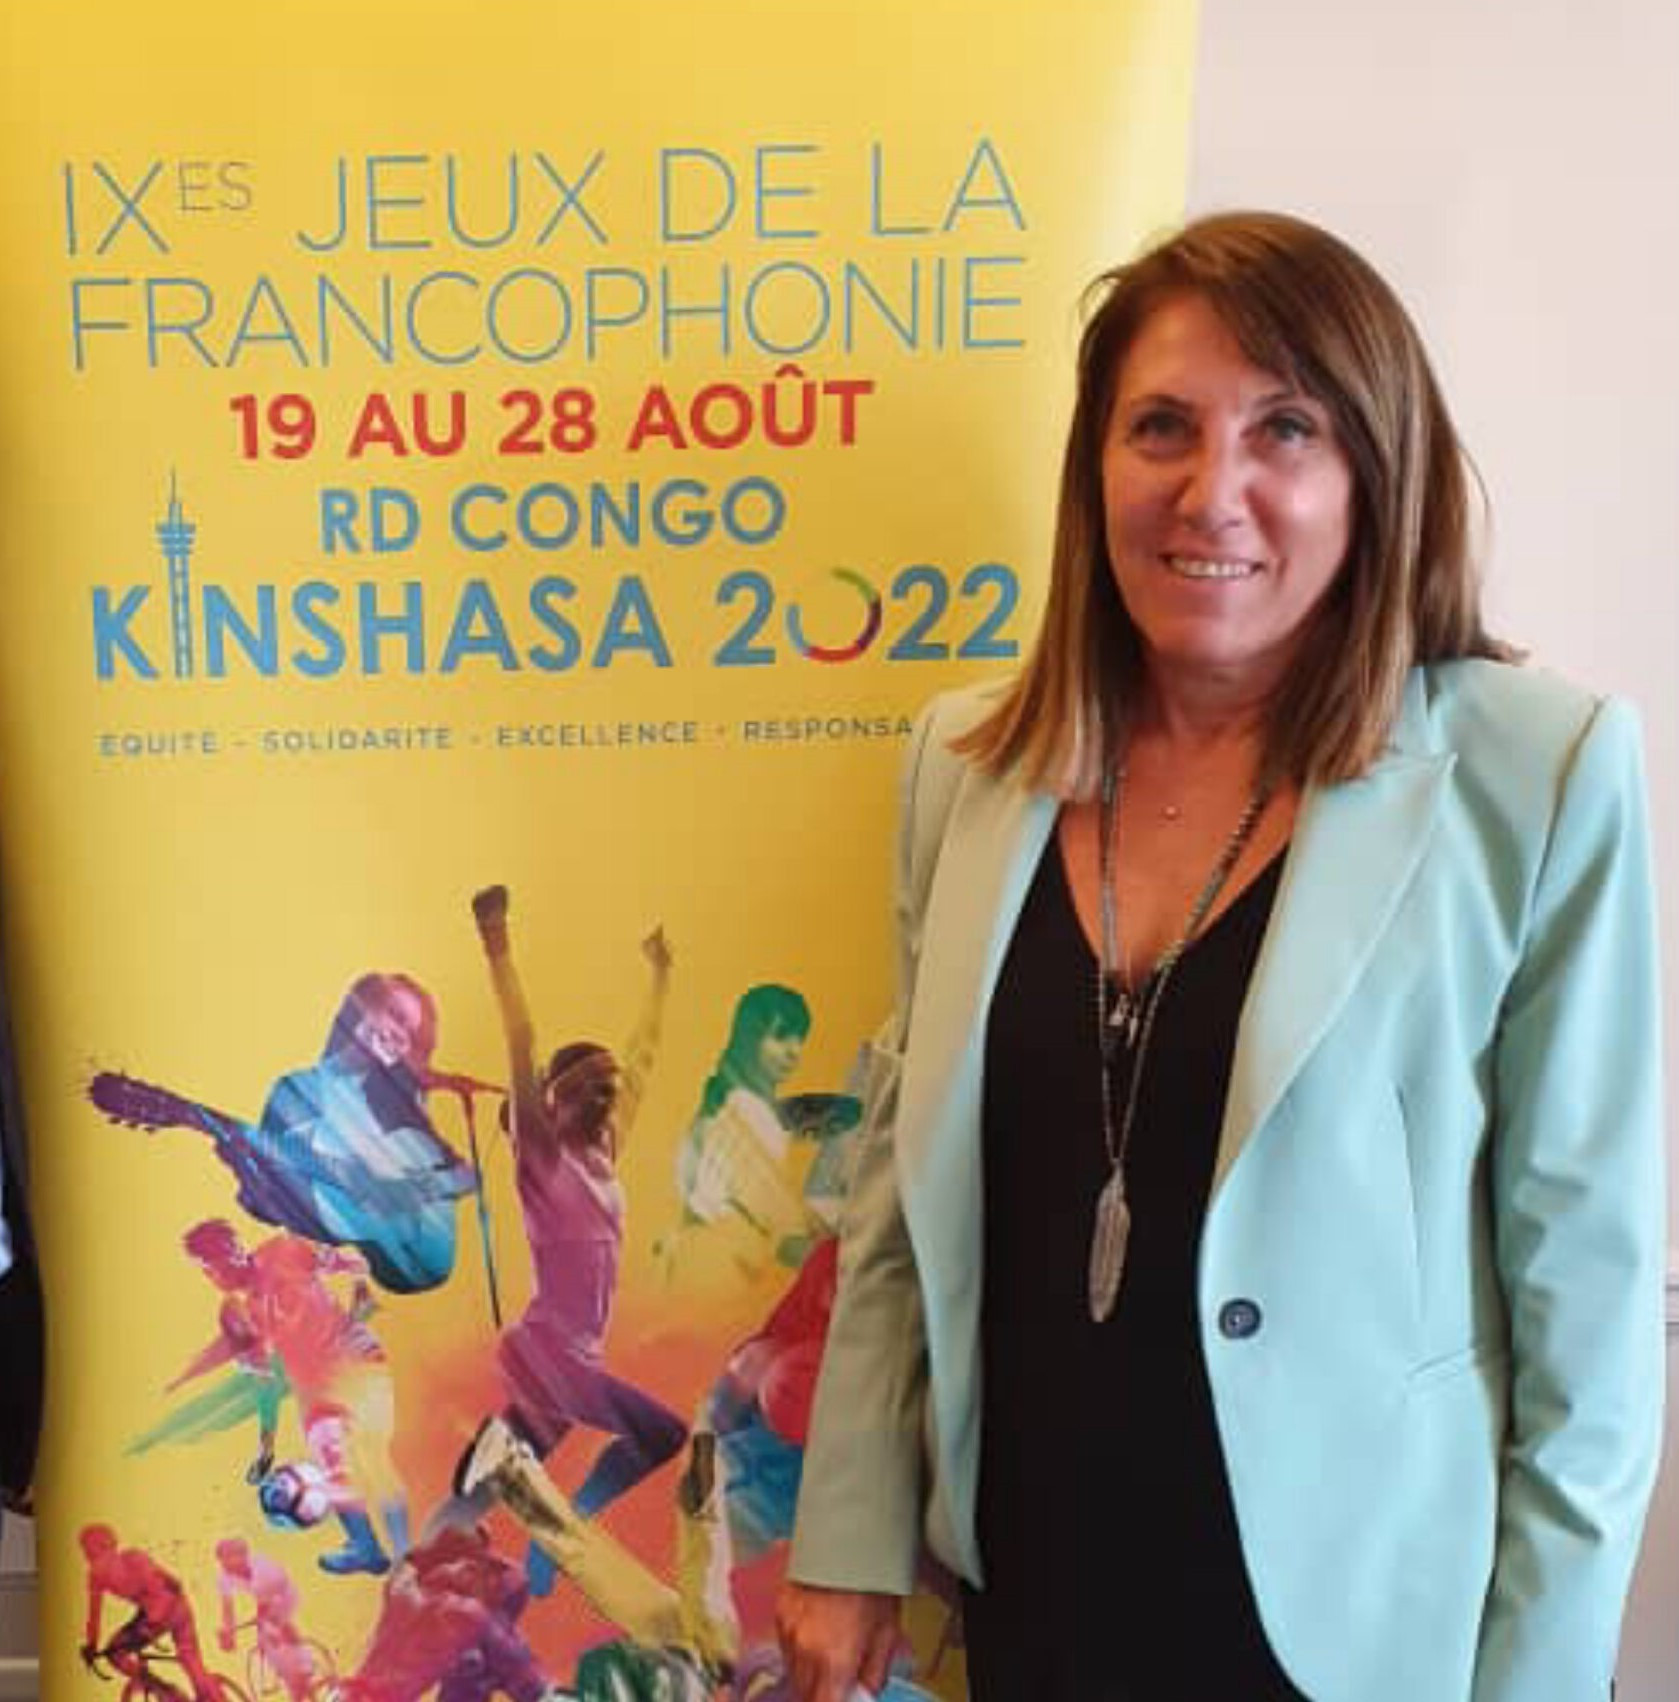 Francophone Games will help put Democratic Republic of Congo on the map, predicts CIJF director